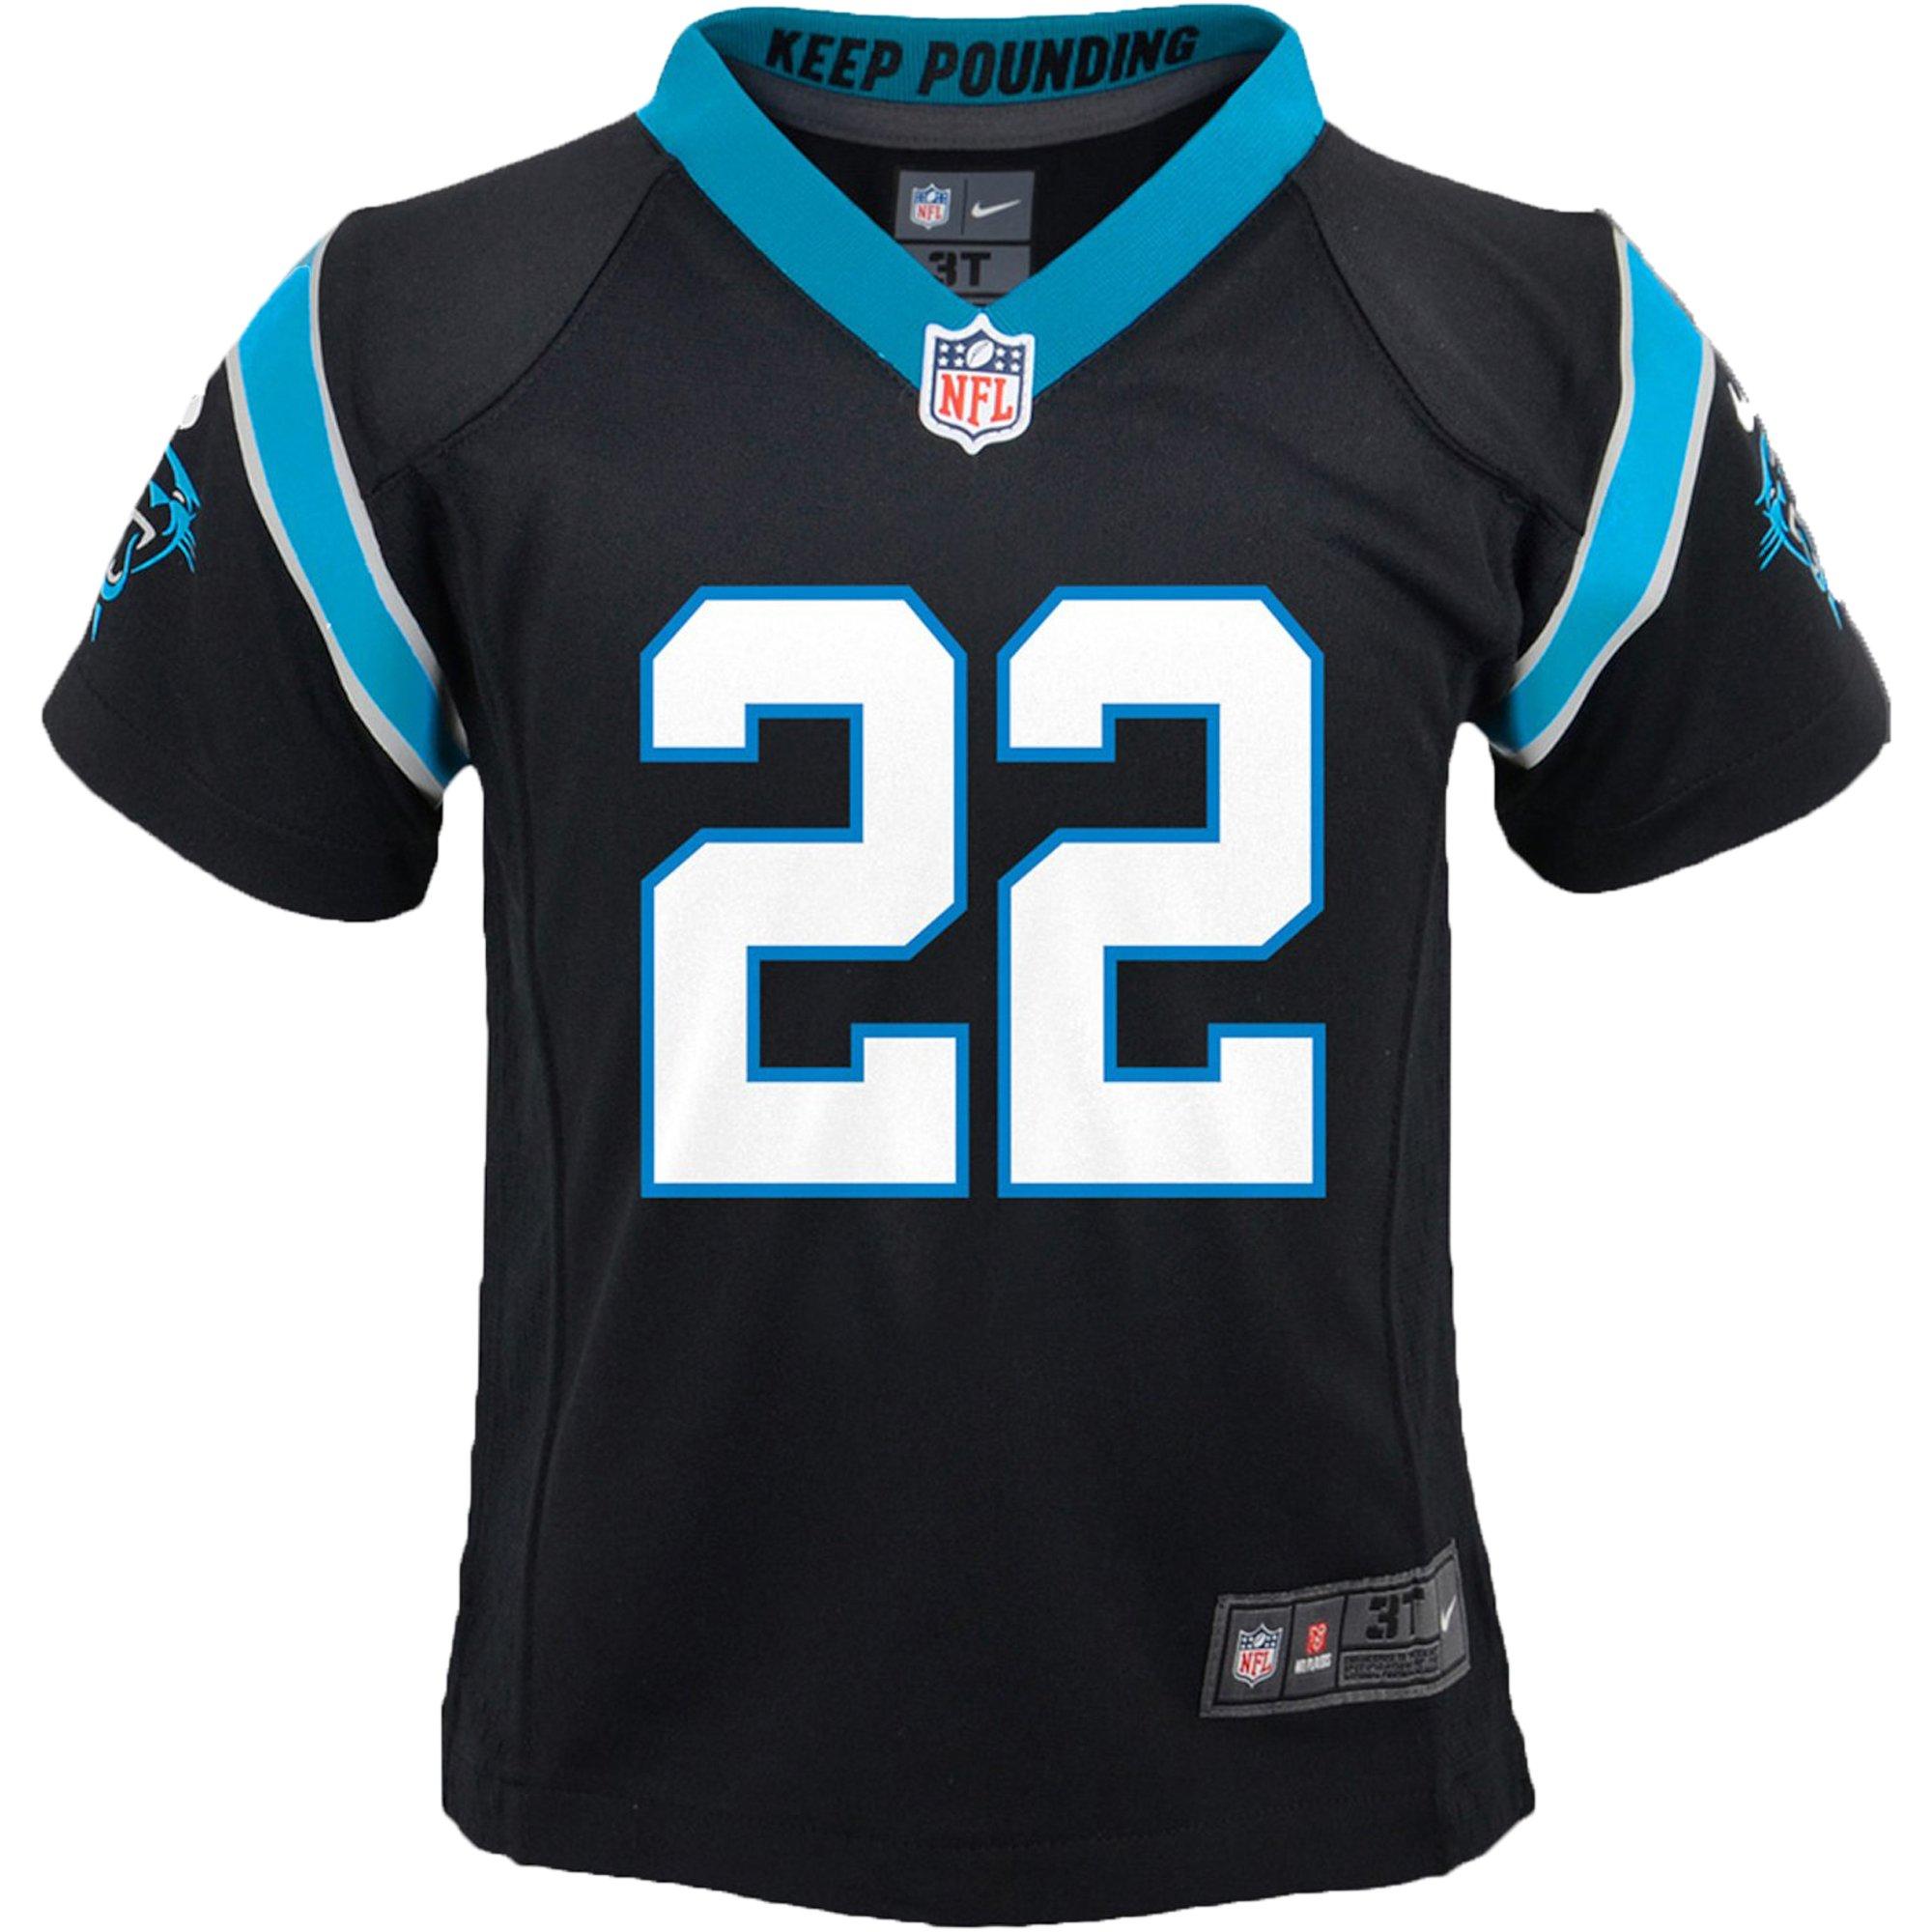 youth panthers jersey